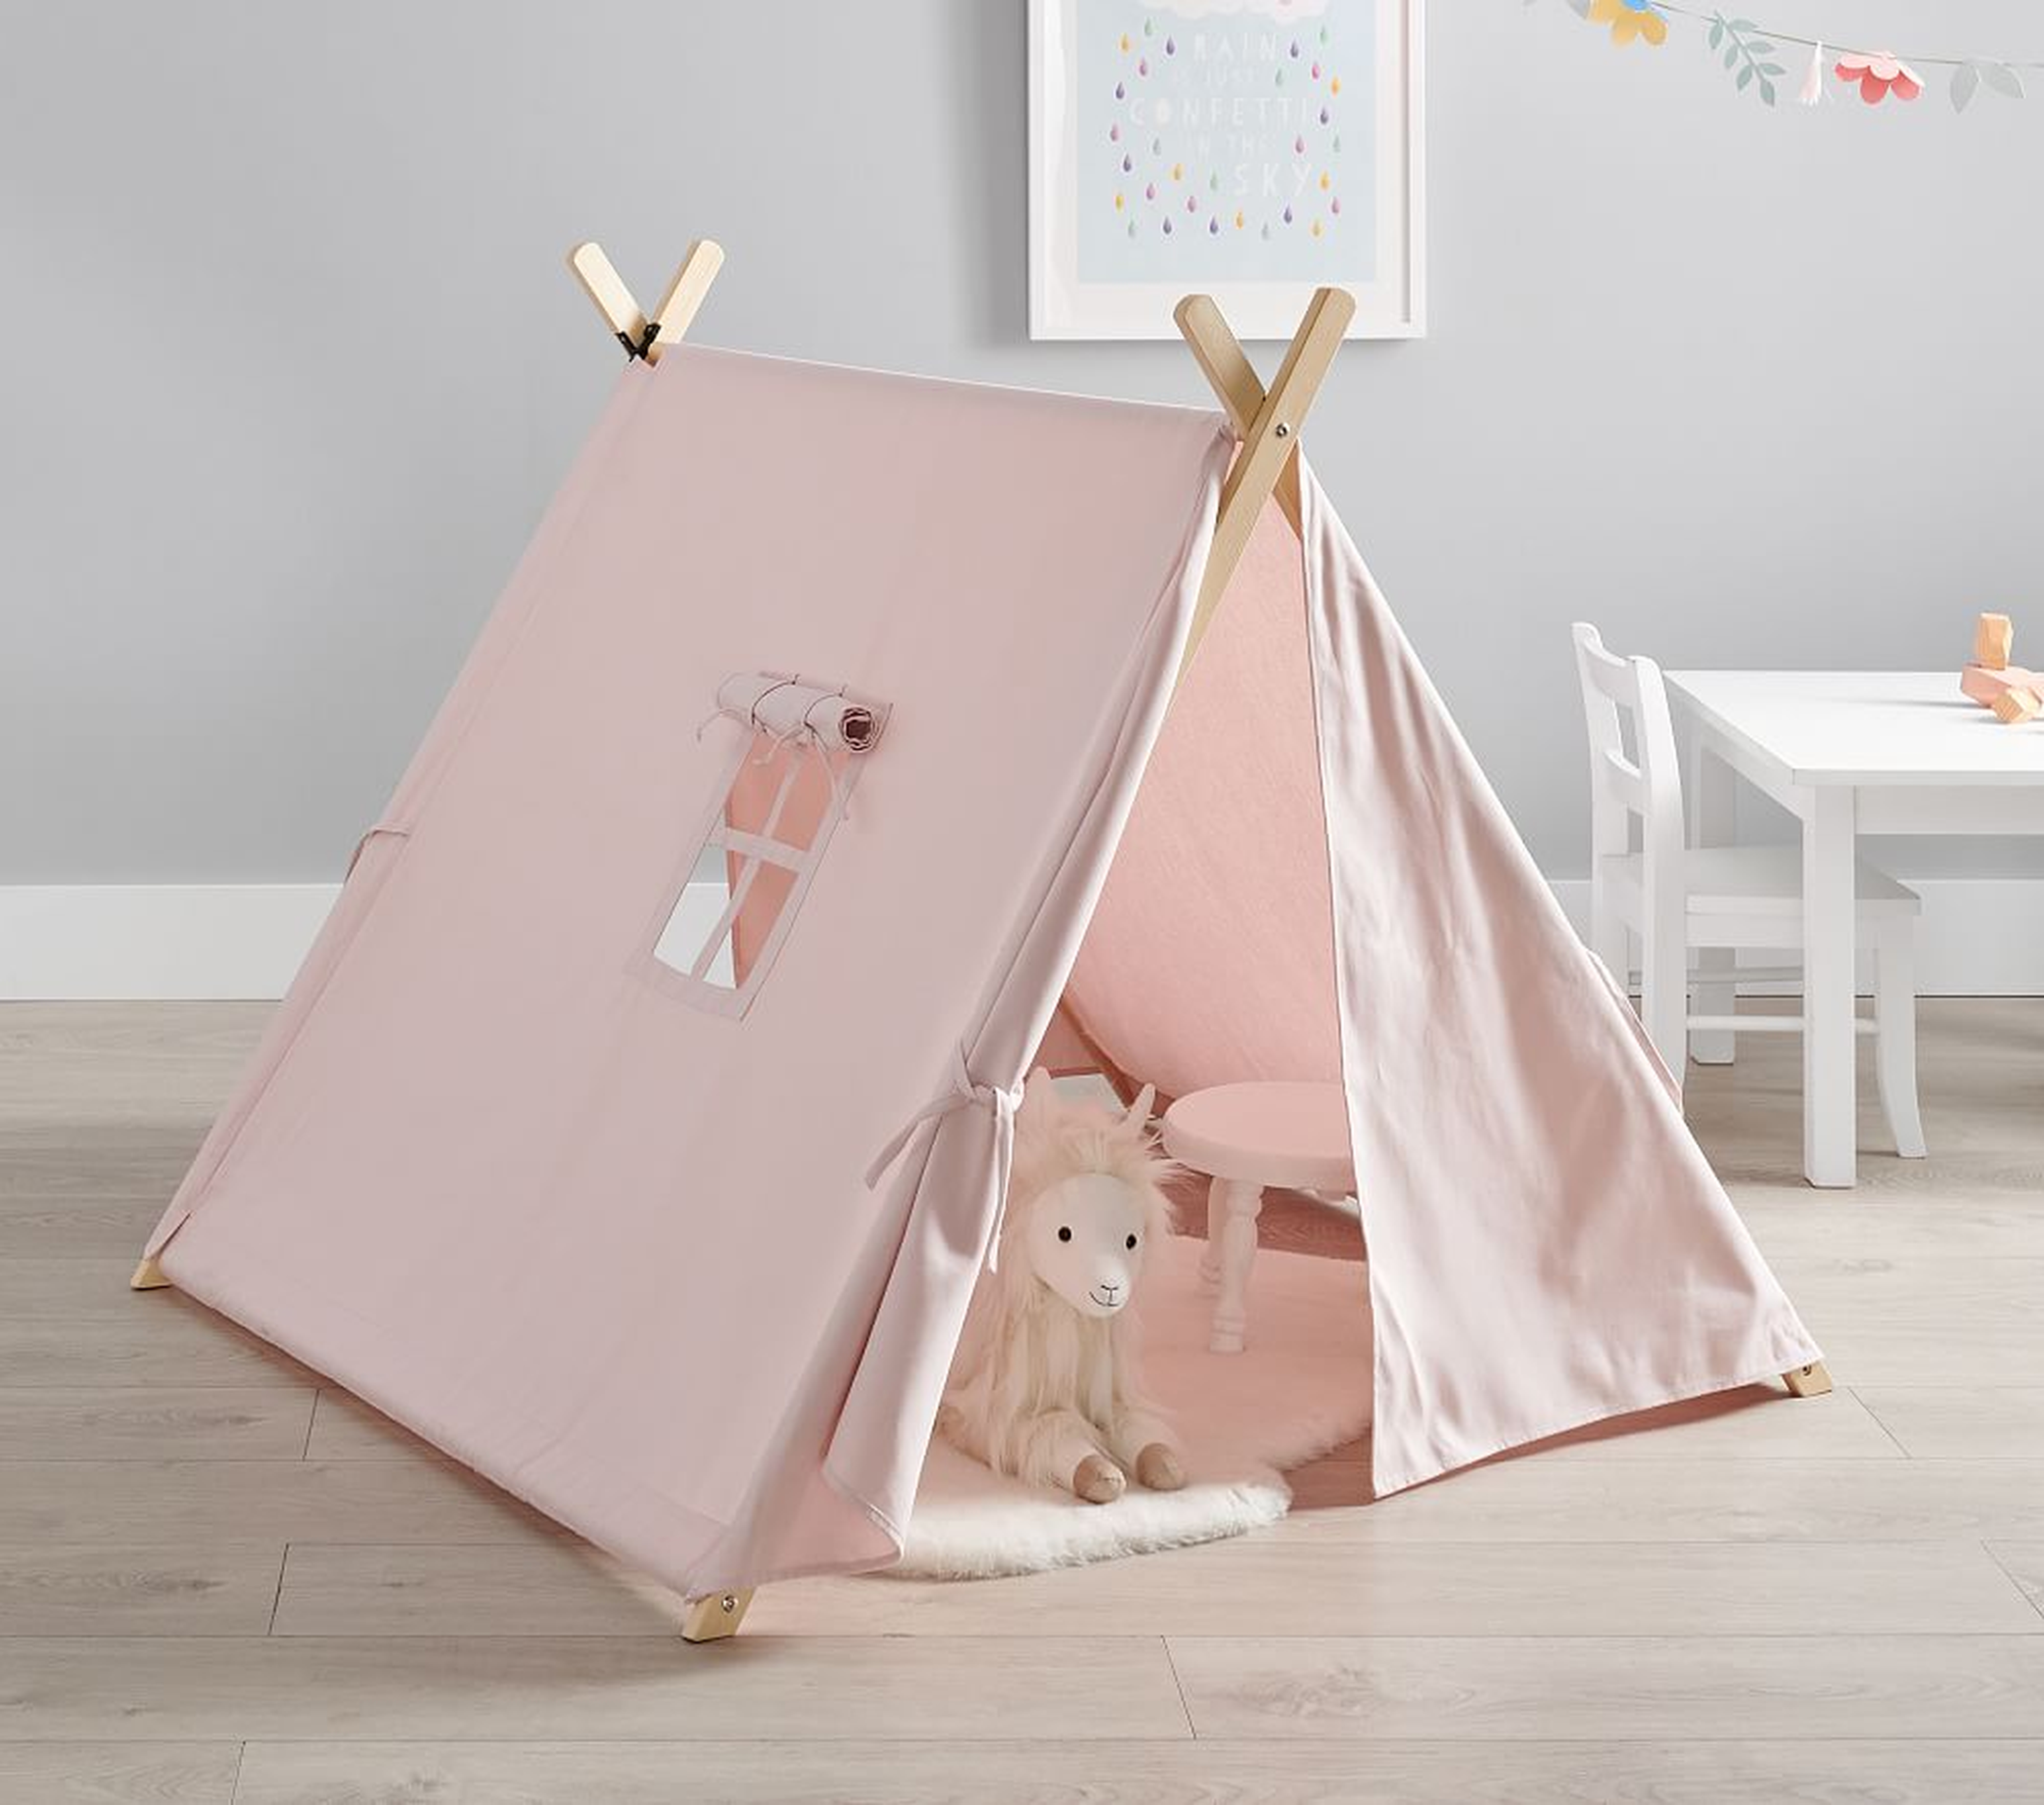 Collapsible Play Tent, Blush, UPS - Pottery Barn Kids